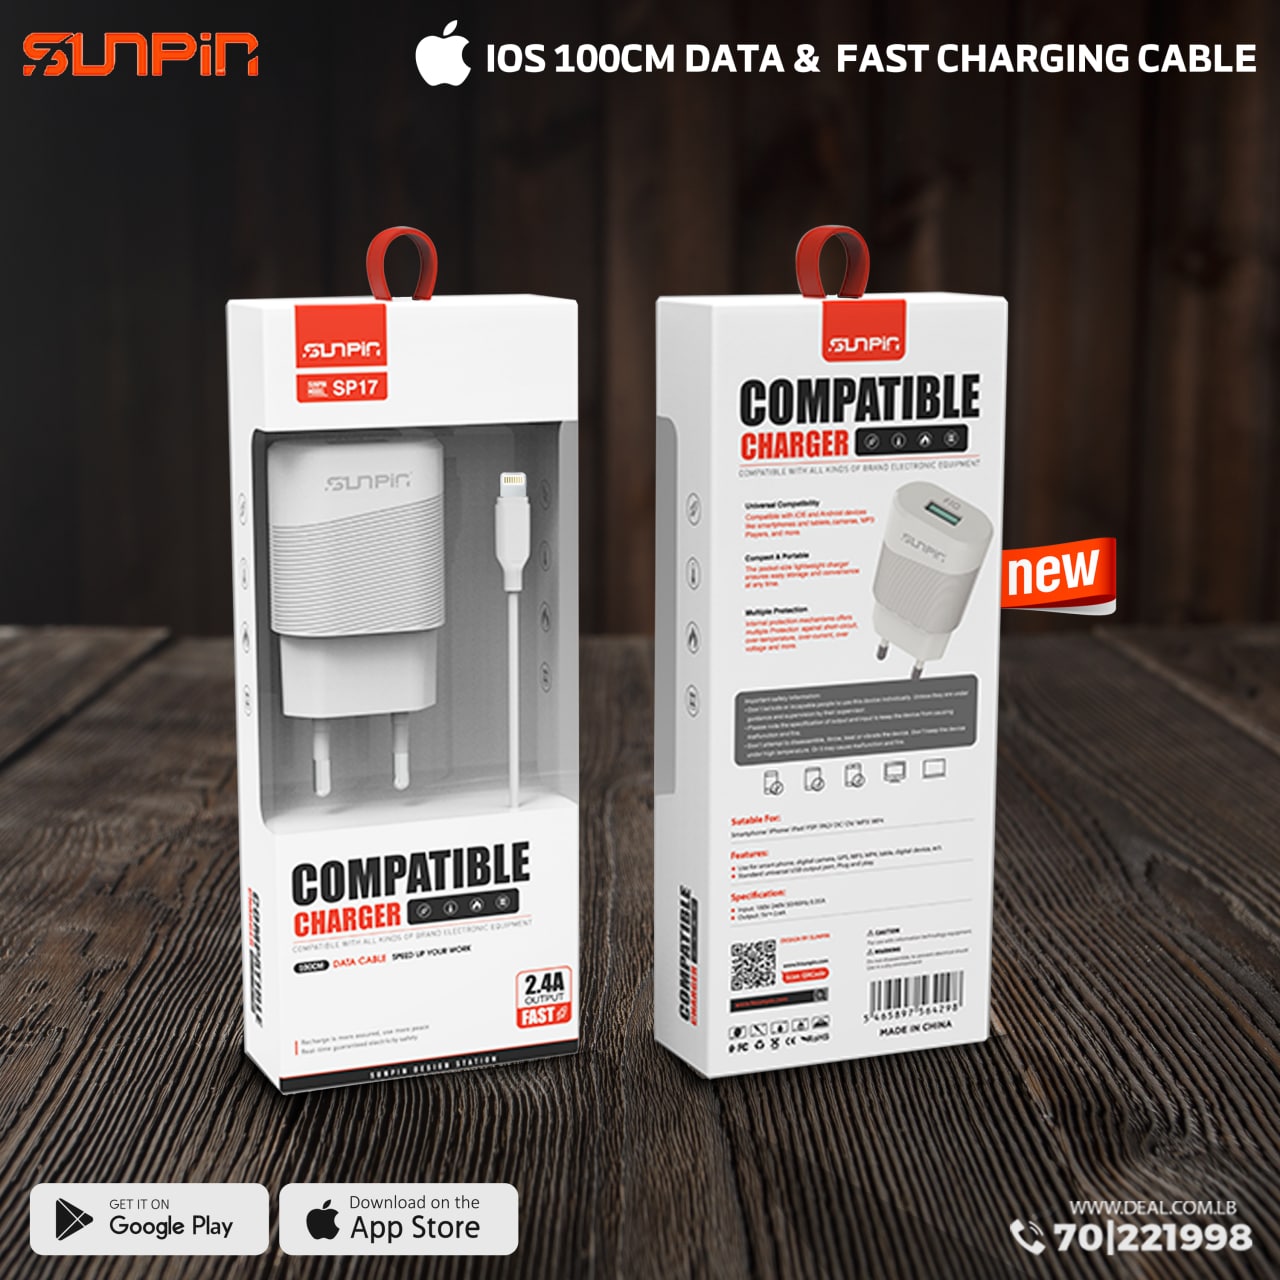 Sunpin SP17 IOS 100CM Data &  Fast Charging Cable 2.4A OUTPUT